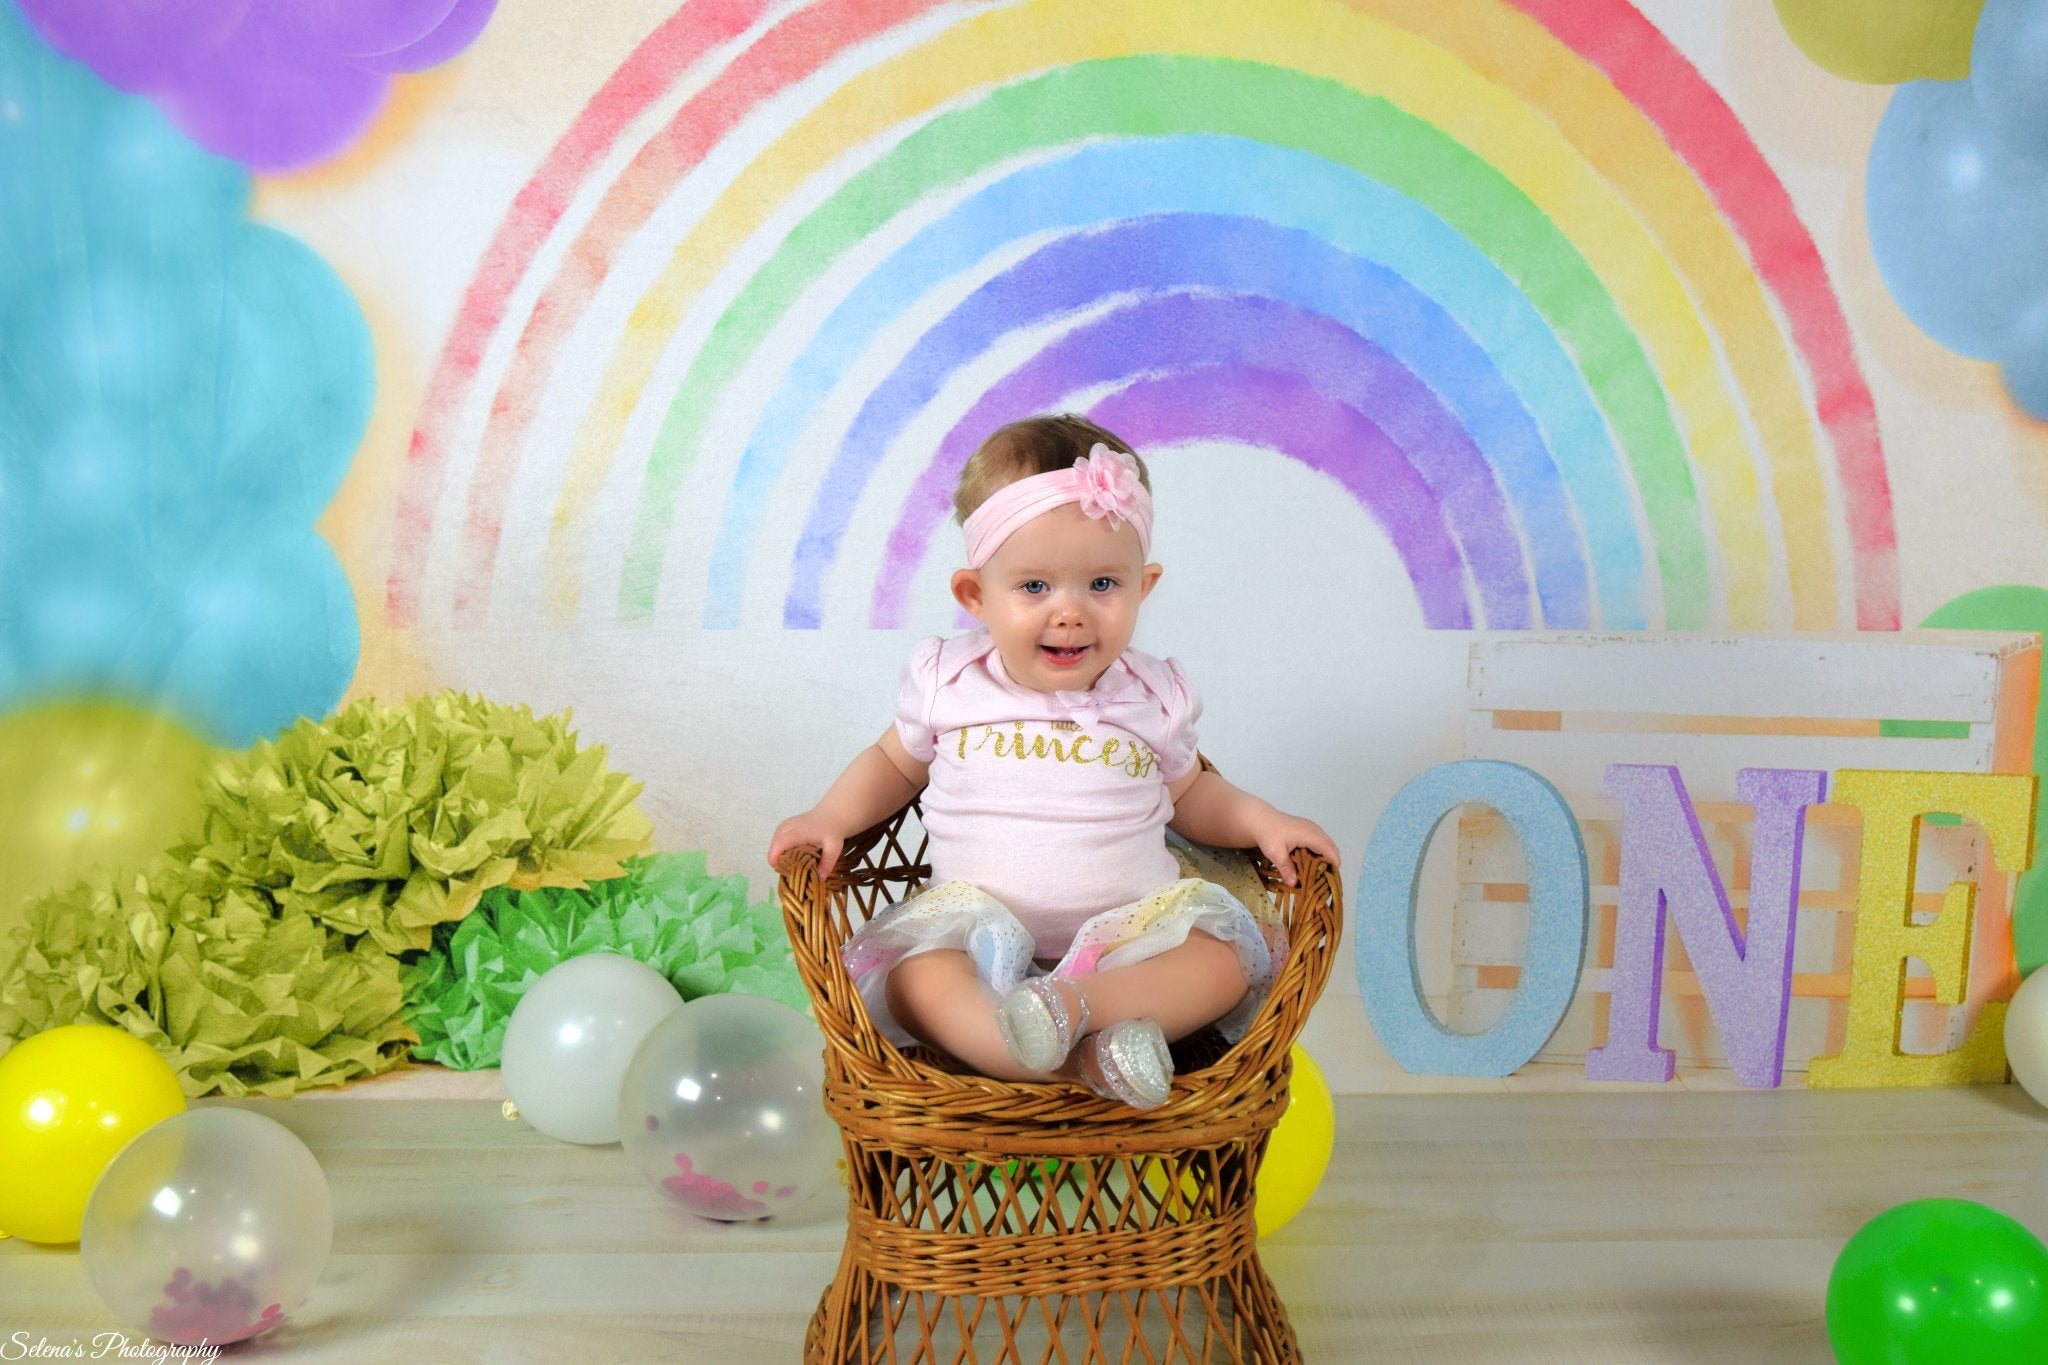 Kate 1st Birthday Rainbow with Balloons Backdrop Designed By Jessica Evangeline photography